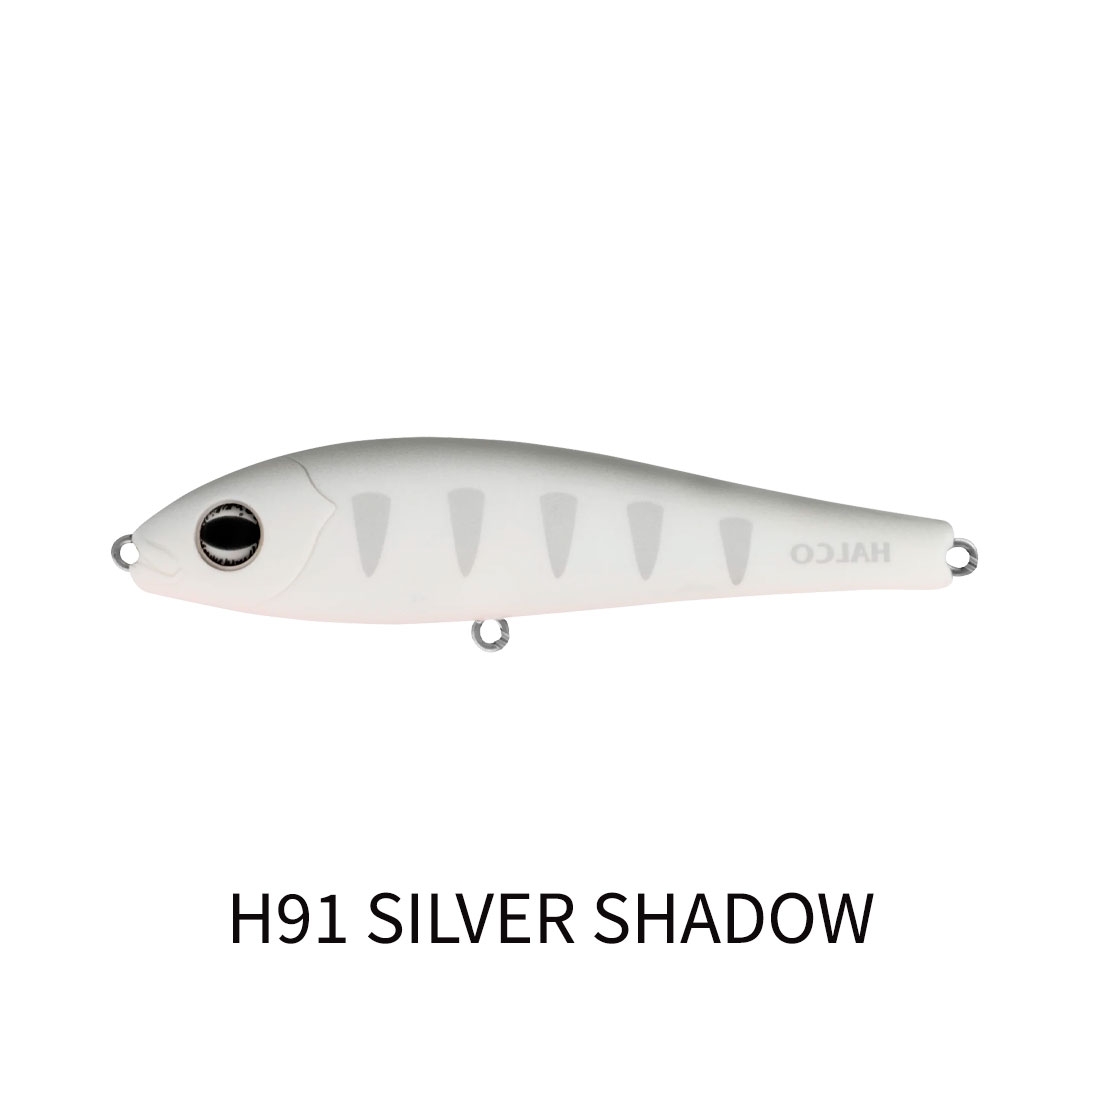 Angling International - 🚨Halco Introduces New Colour!🚨 Here's a first  look at Halco's new H19 SILVER SHADOW colour. It will be available across a  wide range of the Halco lure portfolio including